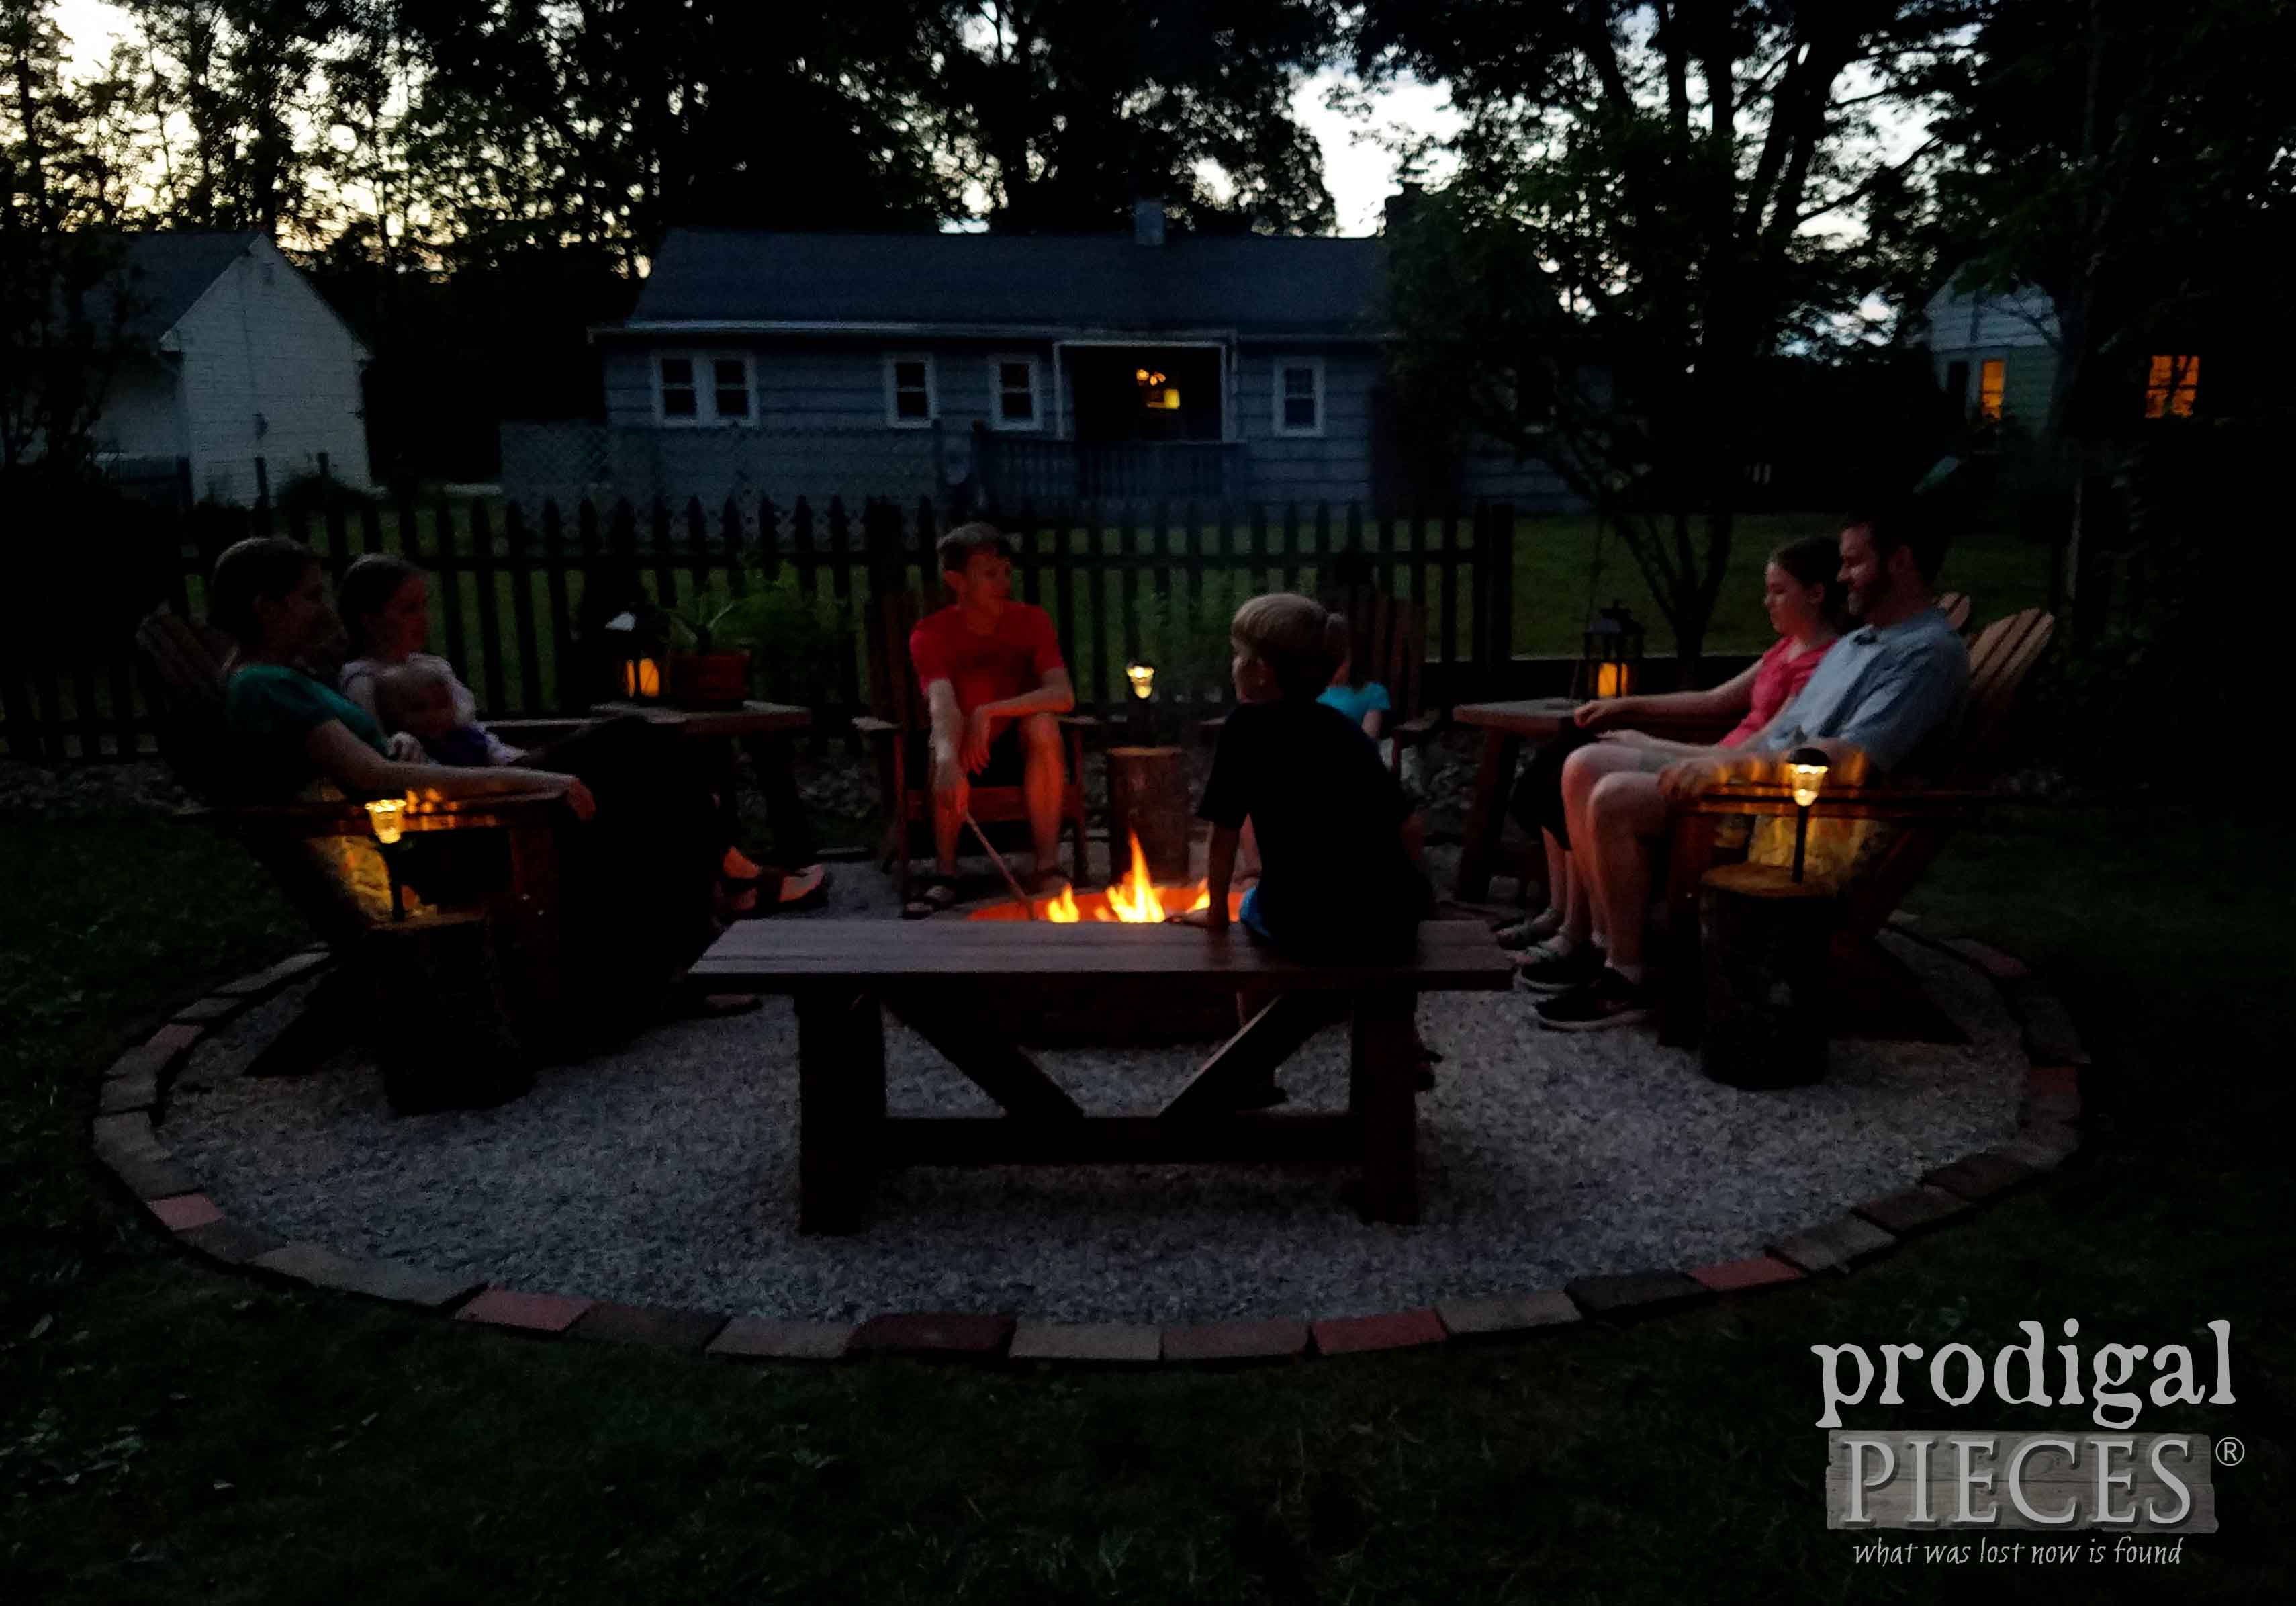 Family Sitting Fireside at DIY Fire Pit by Prodigal Pieces | prodigalpieces.com